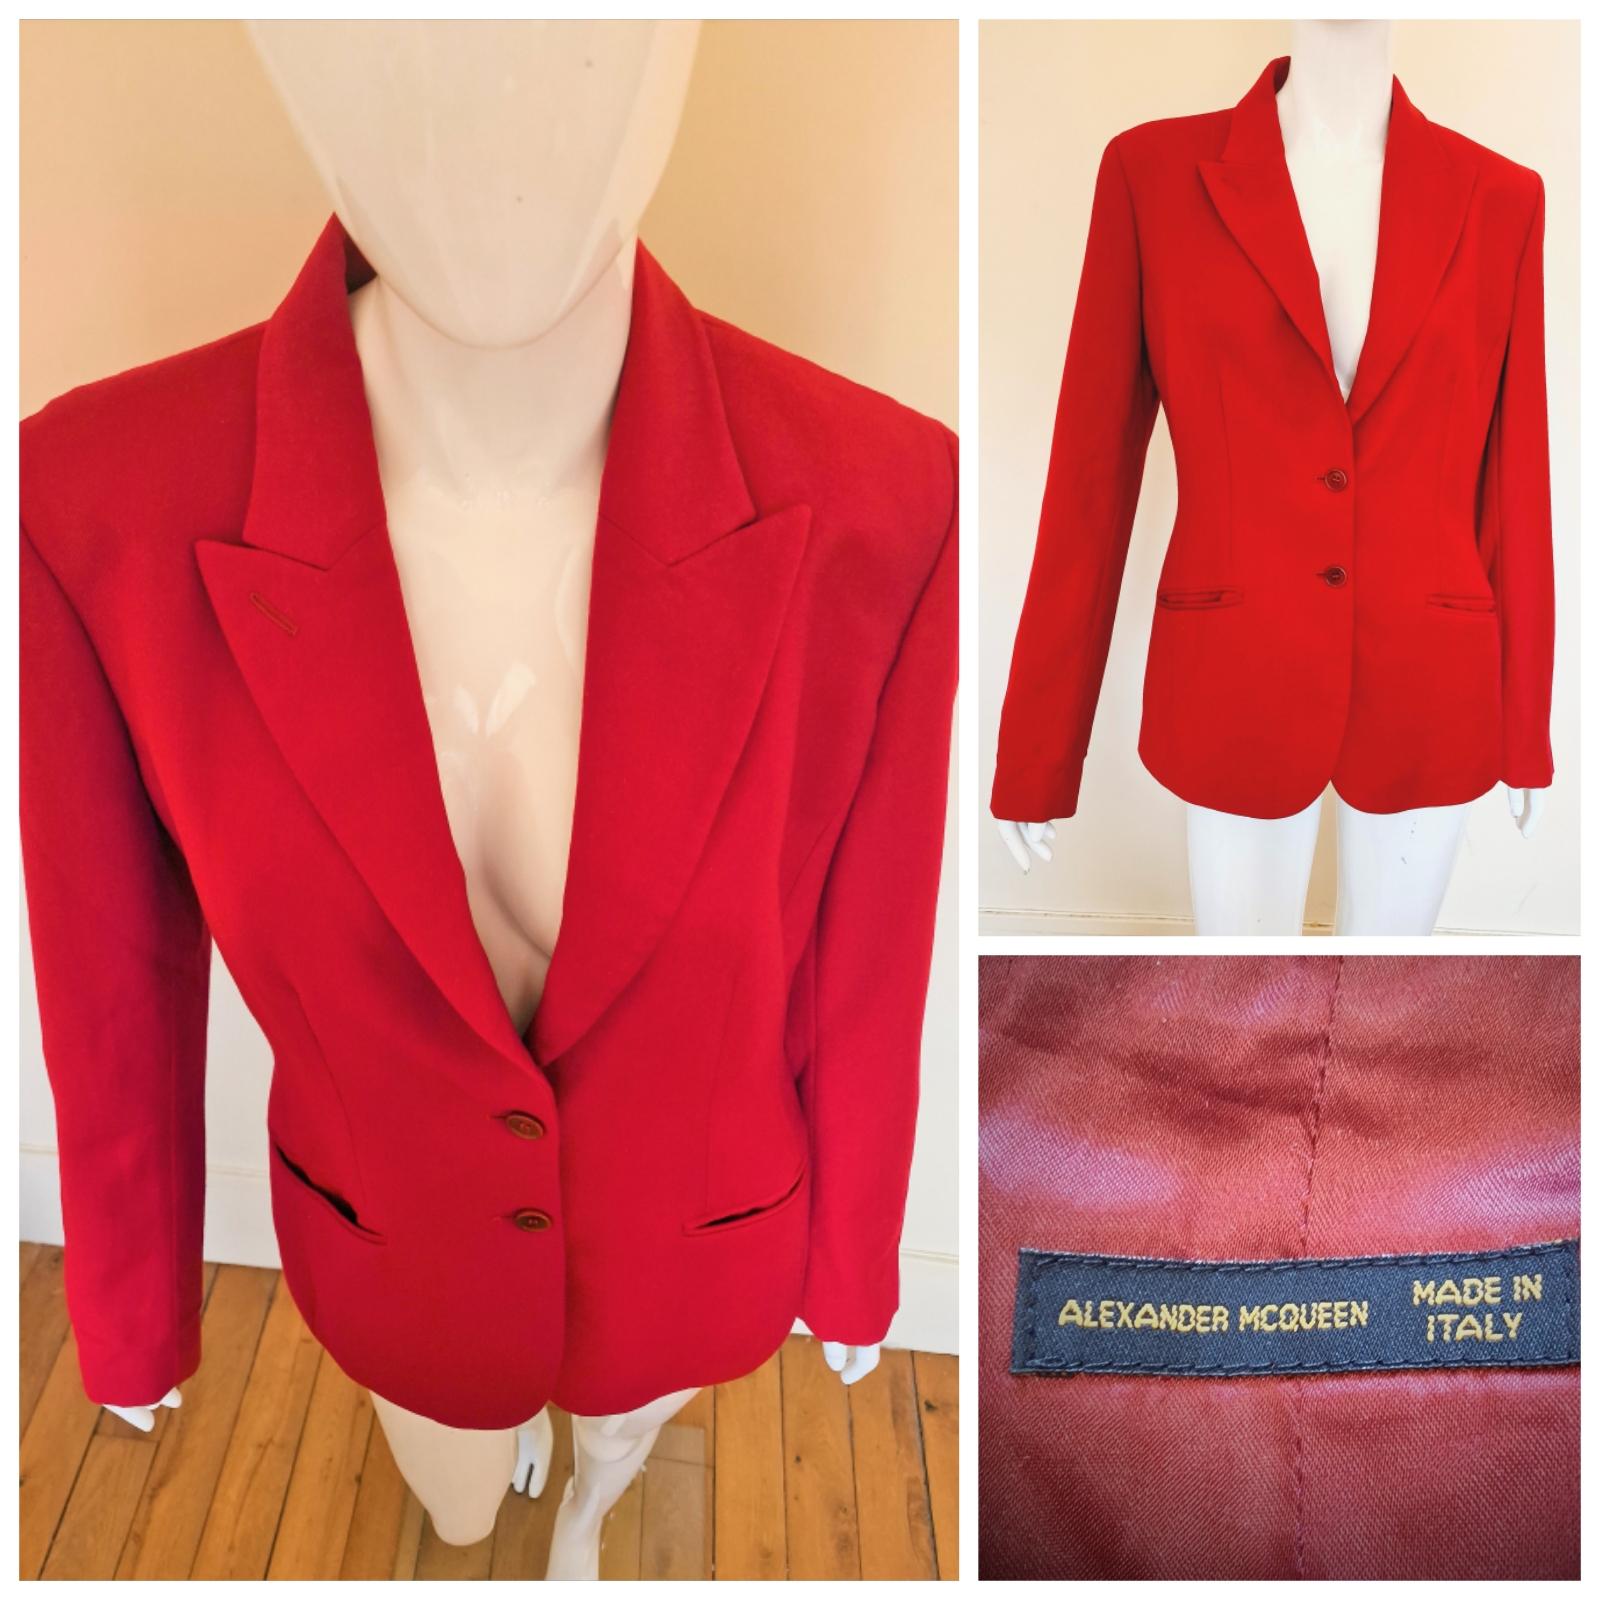 Alexander McQueen blazer jacket.
From the early McQueen`s ear!
With shuolder pads!

EXCELLENT condition!

SIZE
Women: large.
Men: medium.
No size label.
Length: 68 cm / 26.8 inch
Armpit to armpit: 45 cm  / 17.7 inch
Waist: 40 cm / 15/7 inch
Shoulder